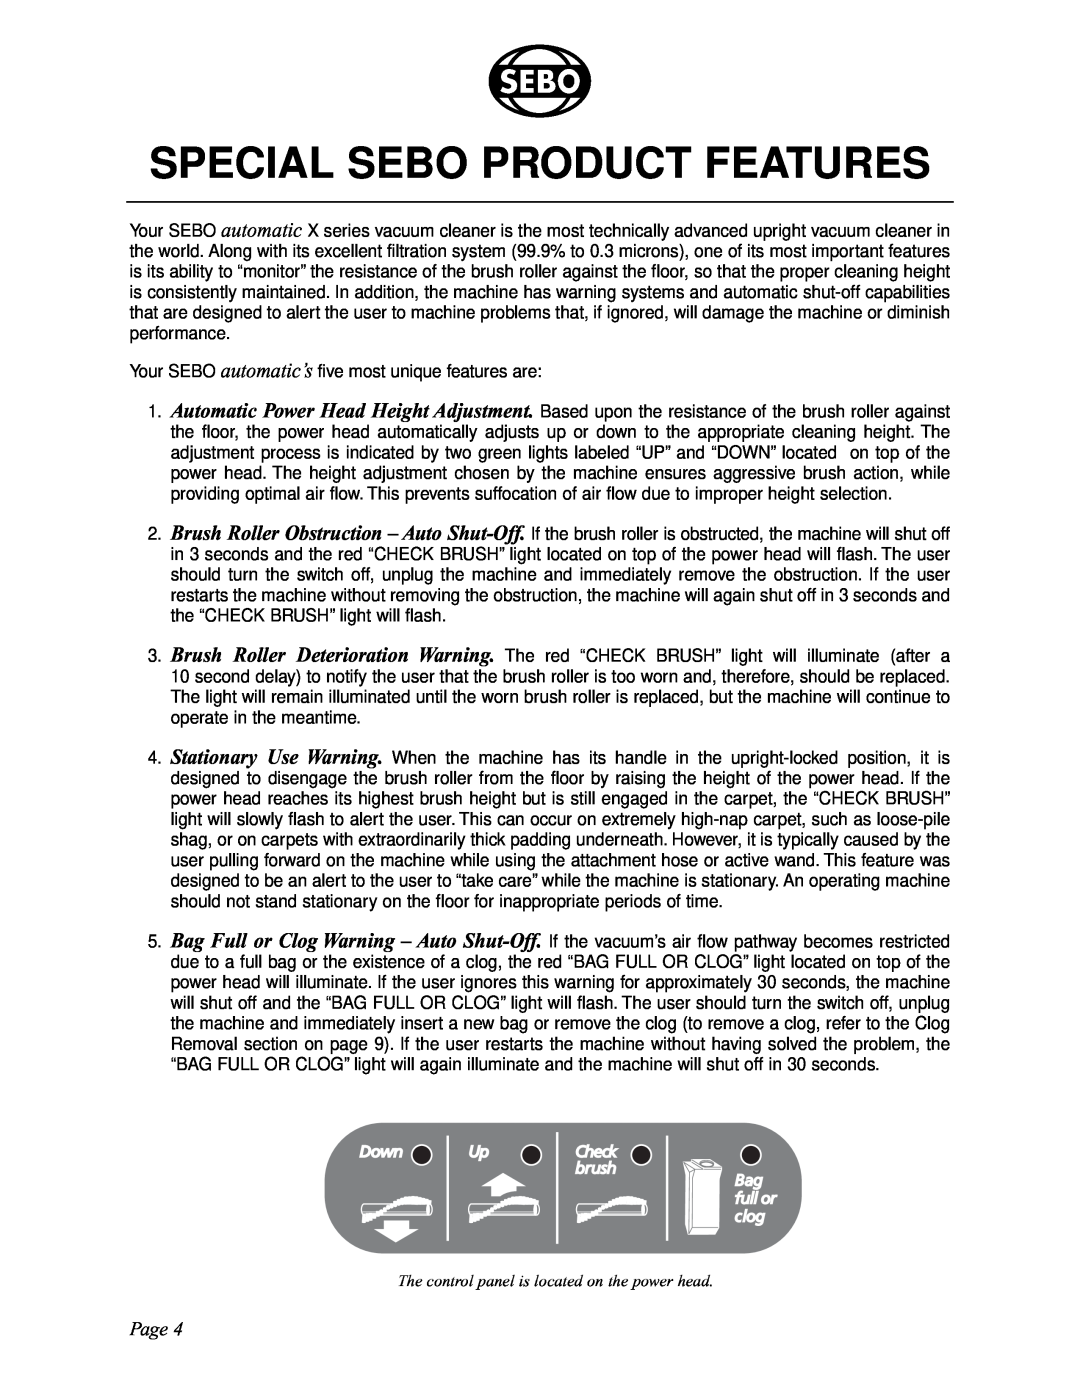 Sebo X5, X4 manual Special Sebo Product Features, Page, The control panel is located on the power head 